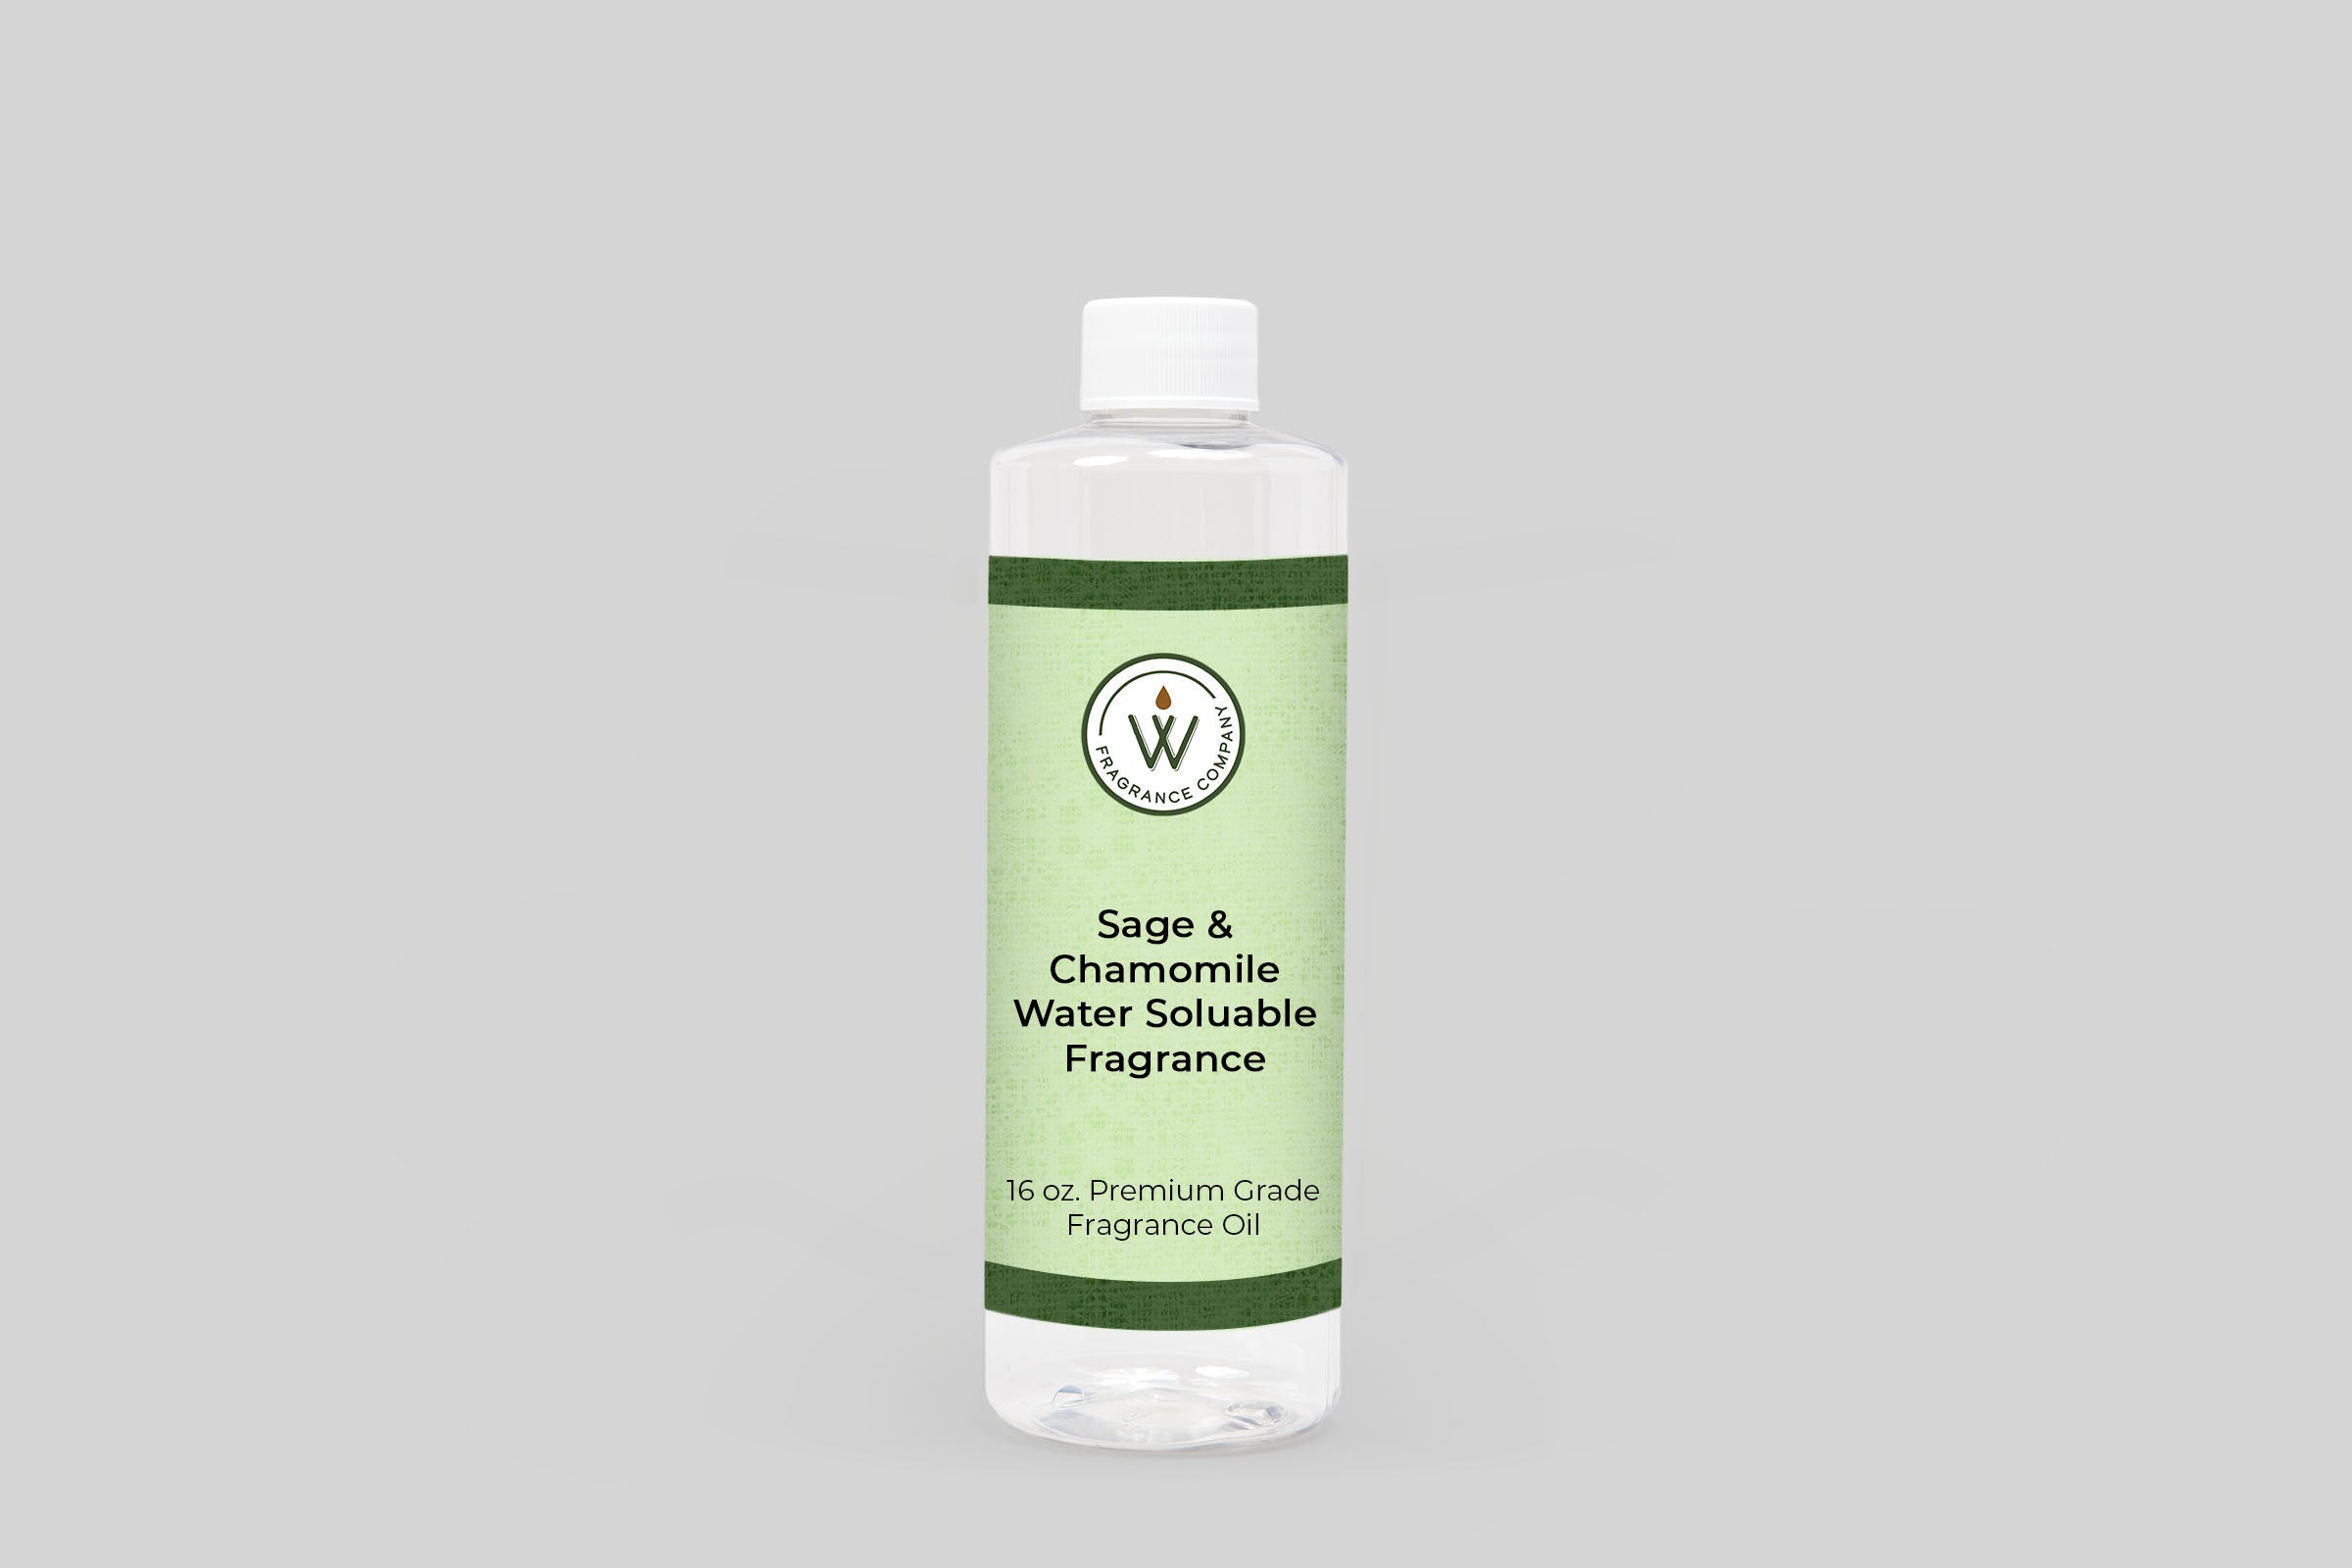 Sage & Chamomile Water Soluble Fragrance